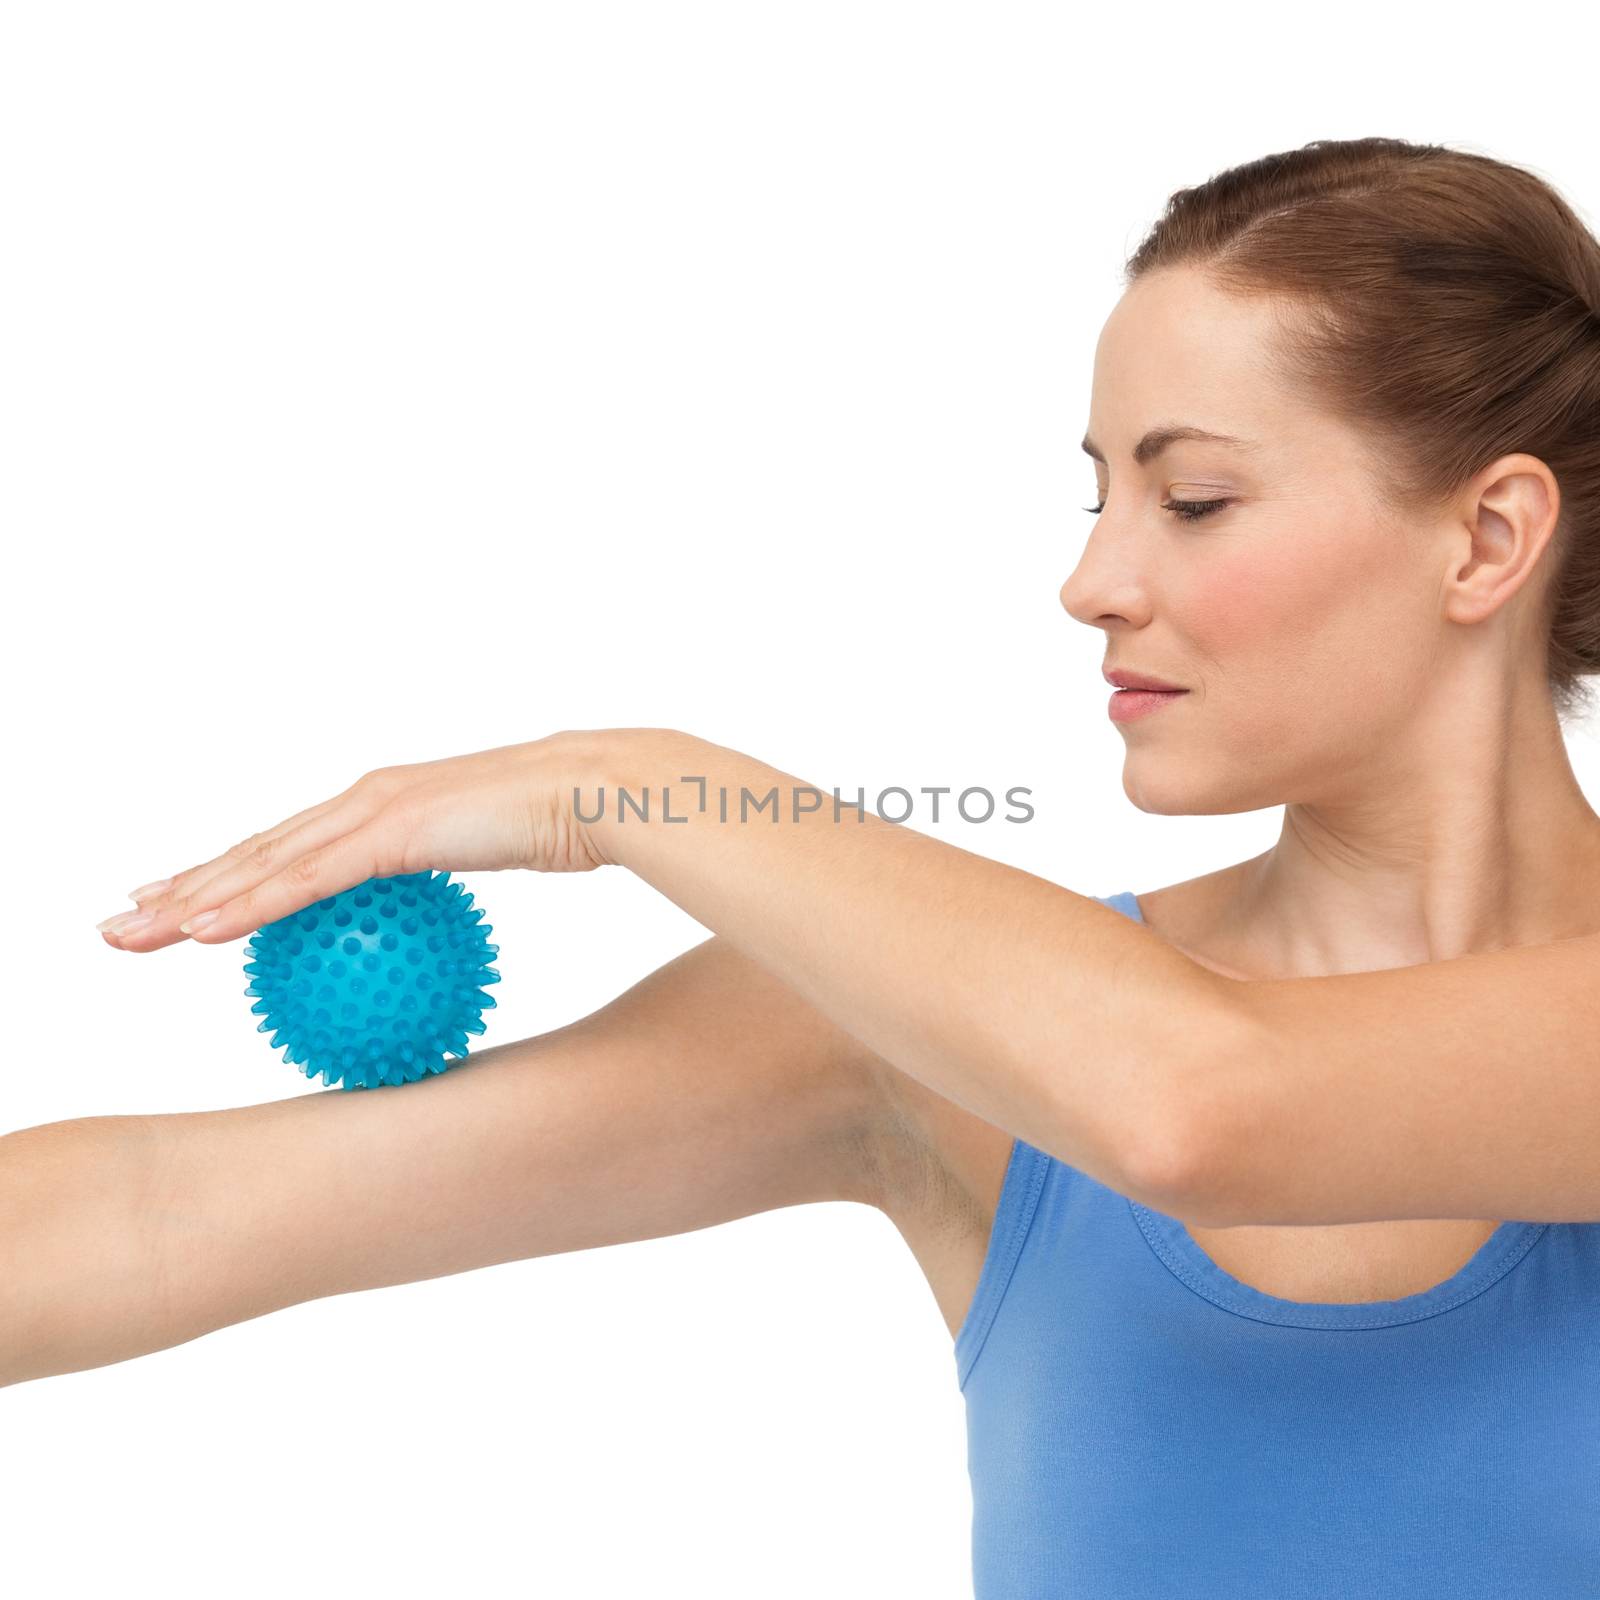 Portrait of a young woman holding stress ball on arm by Wavebreakmedia